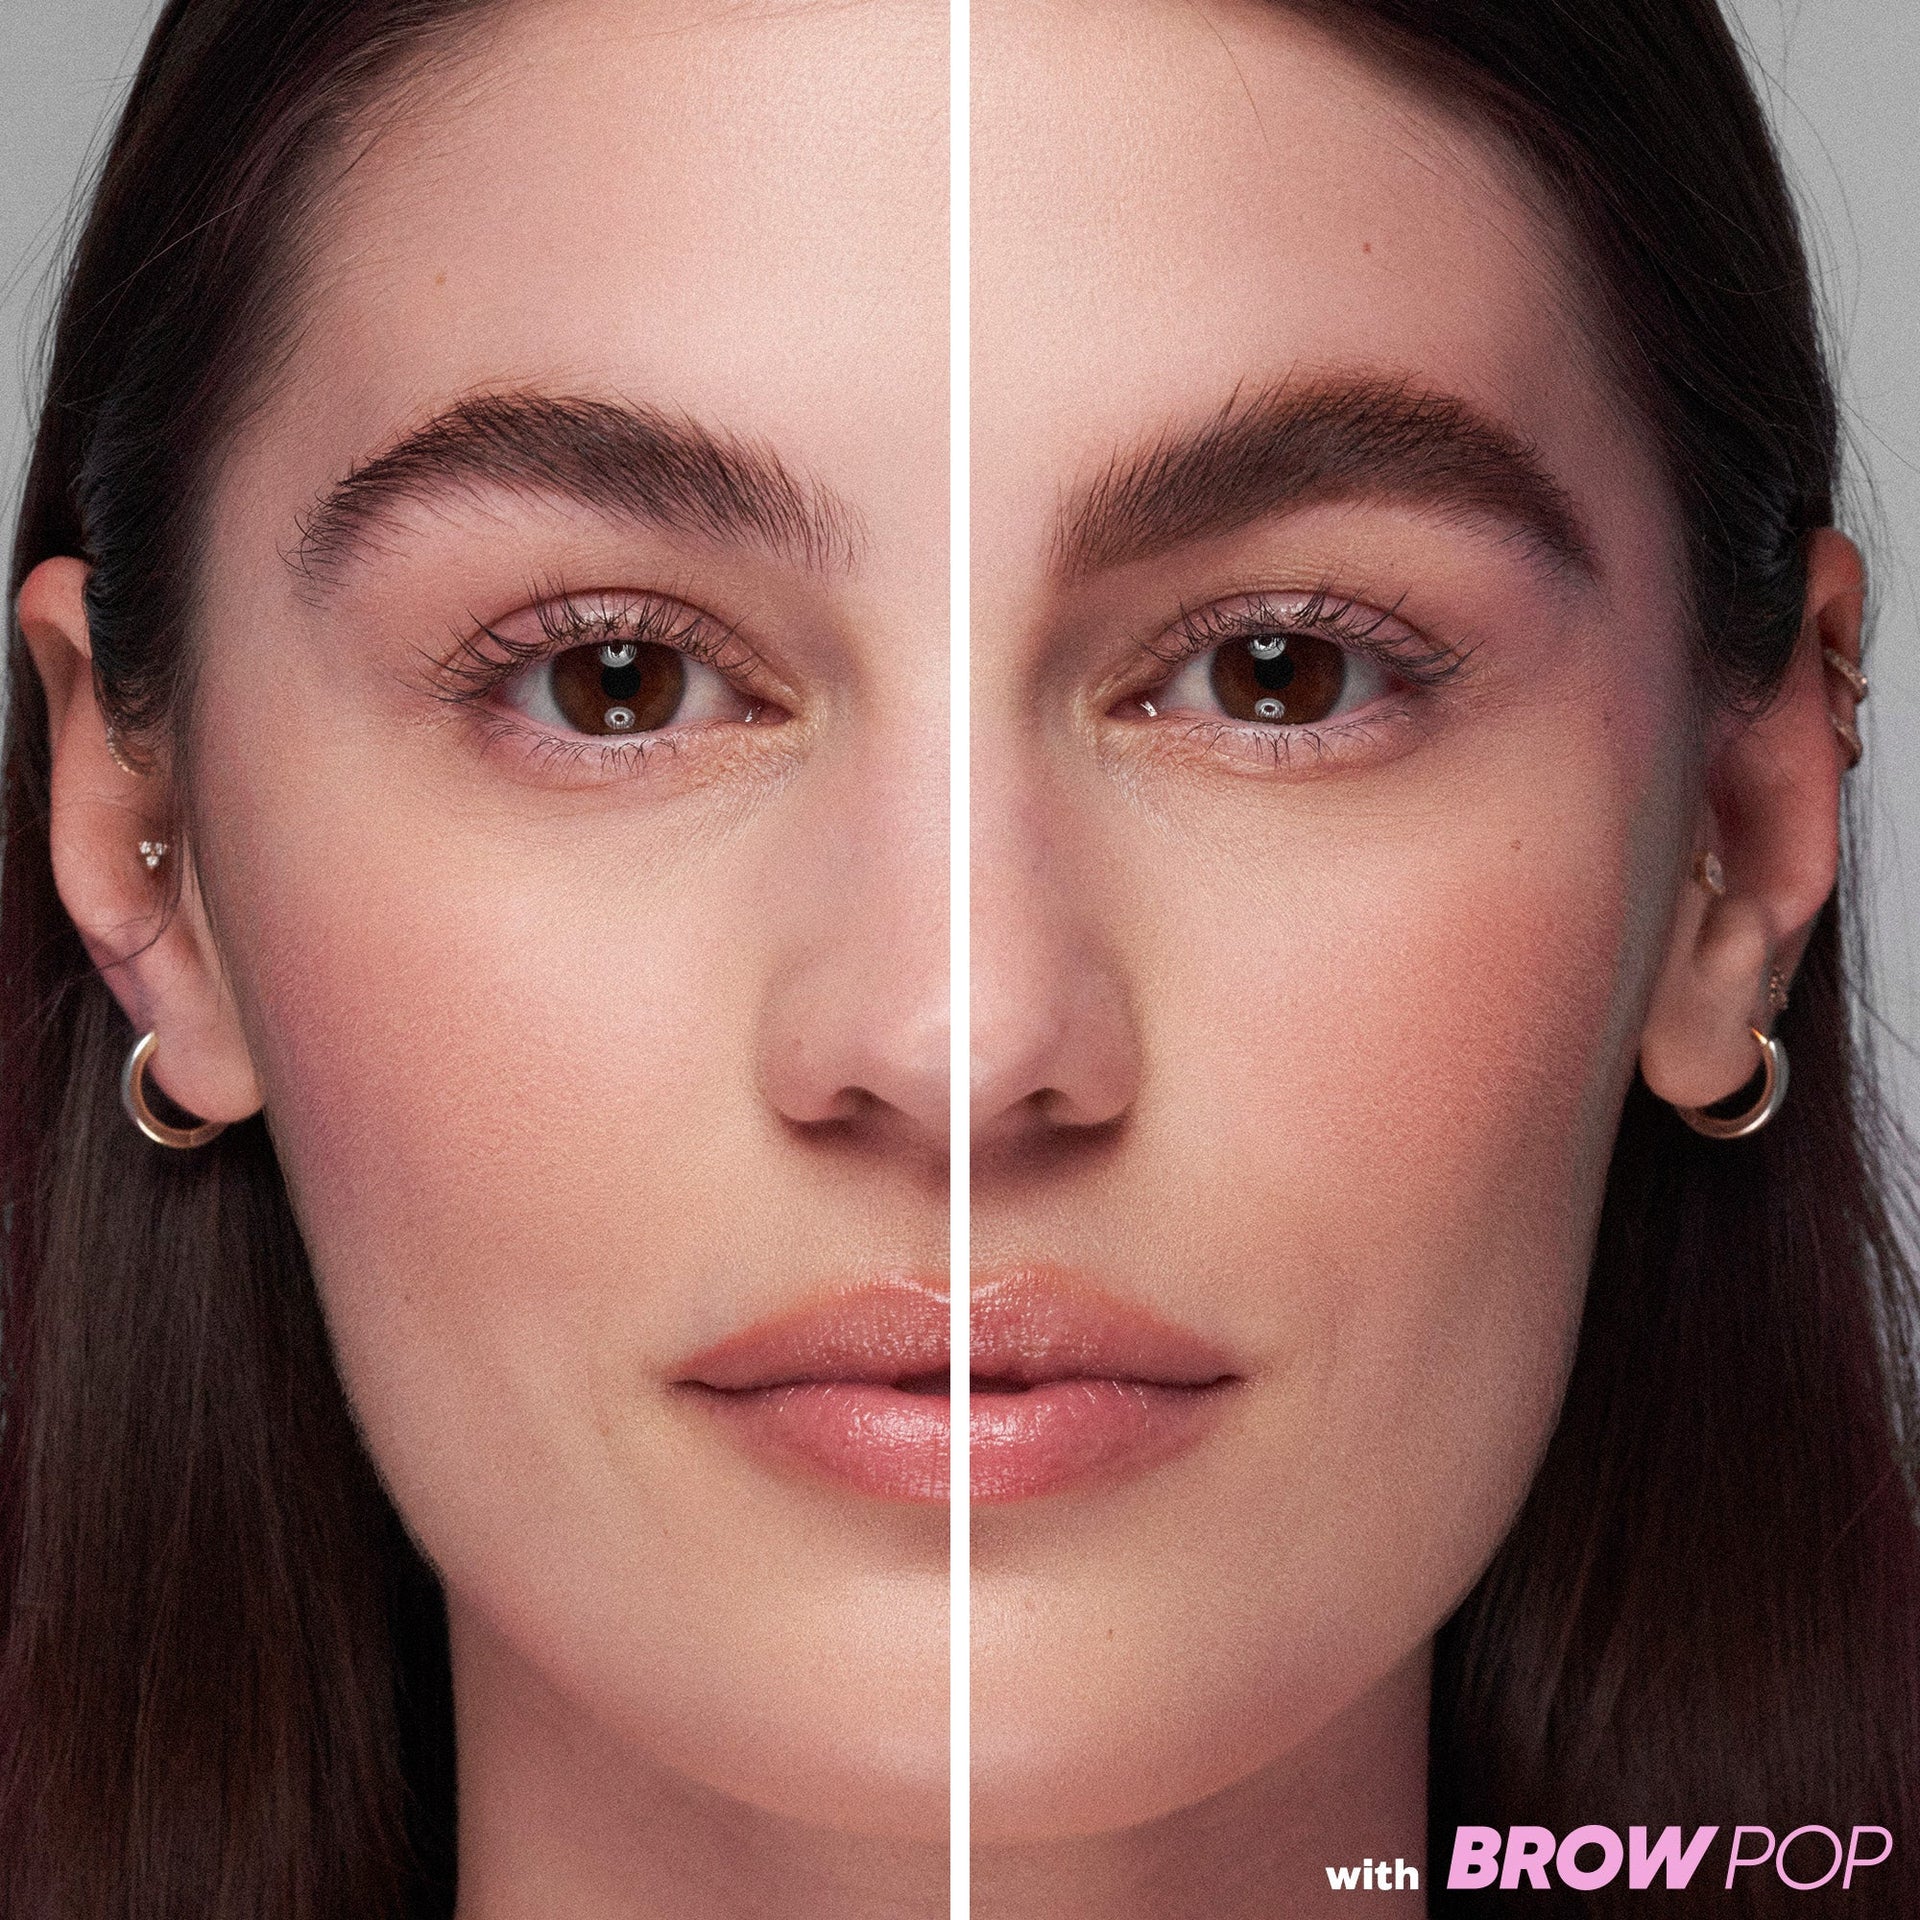 Before and after application of 'Medium Chocolate Brown' Brow Pop shade.